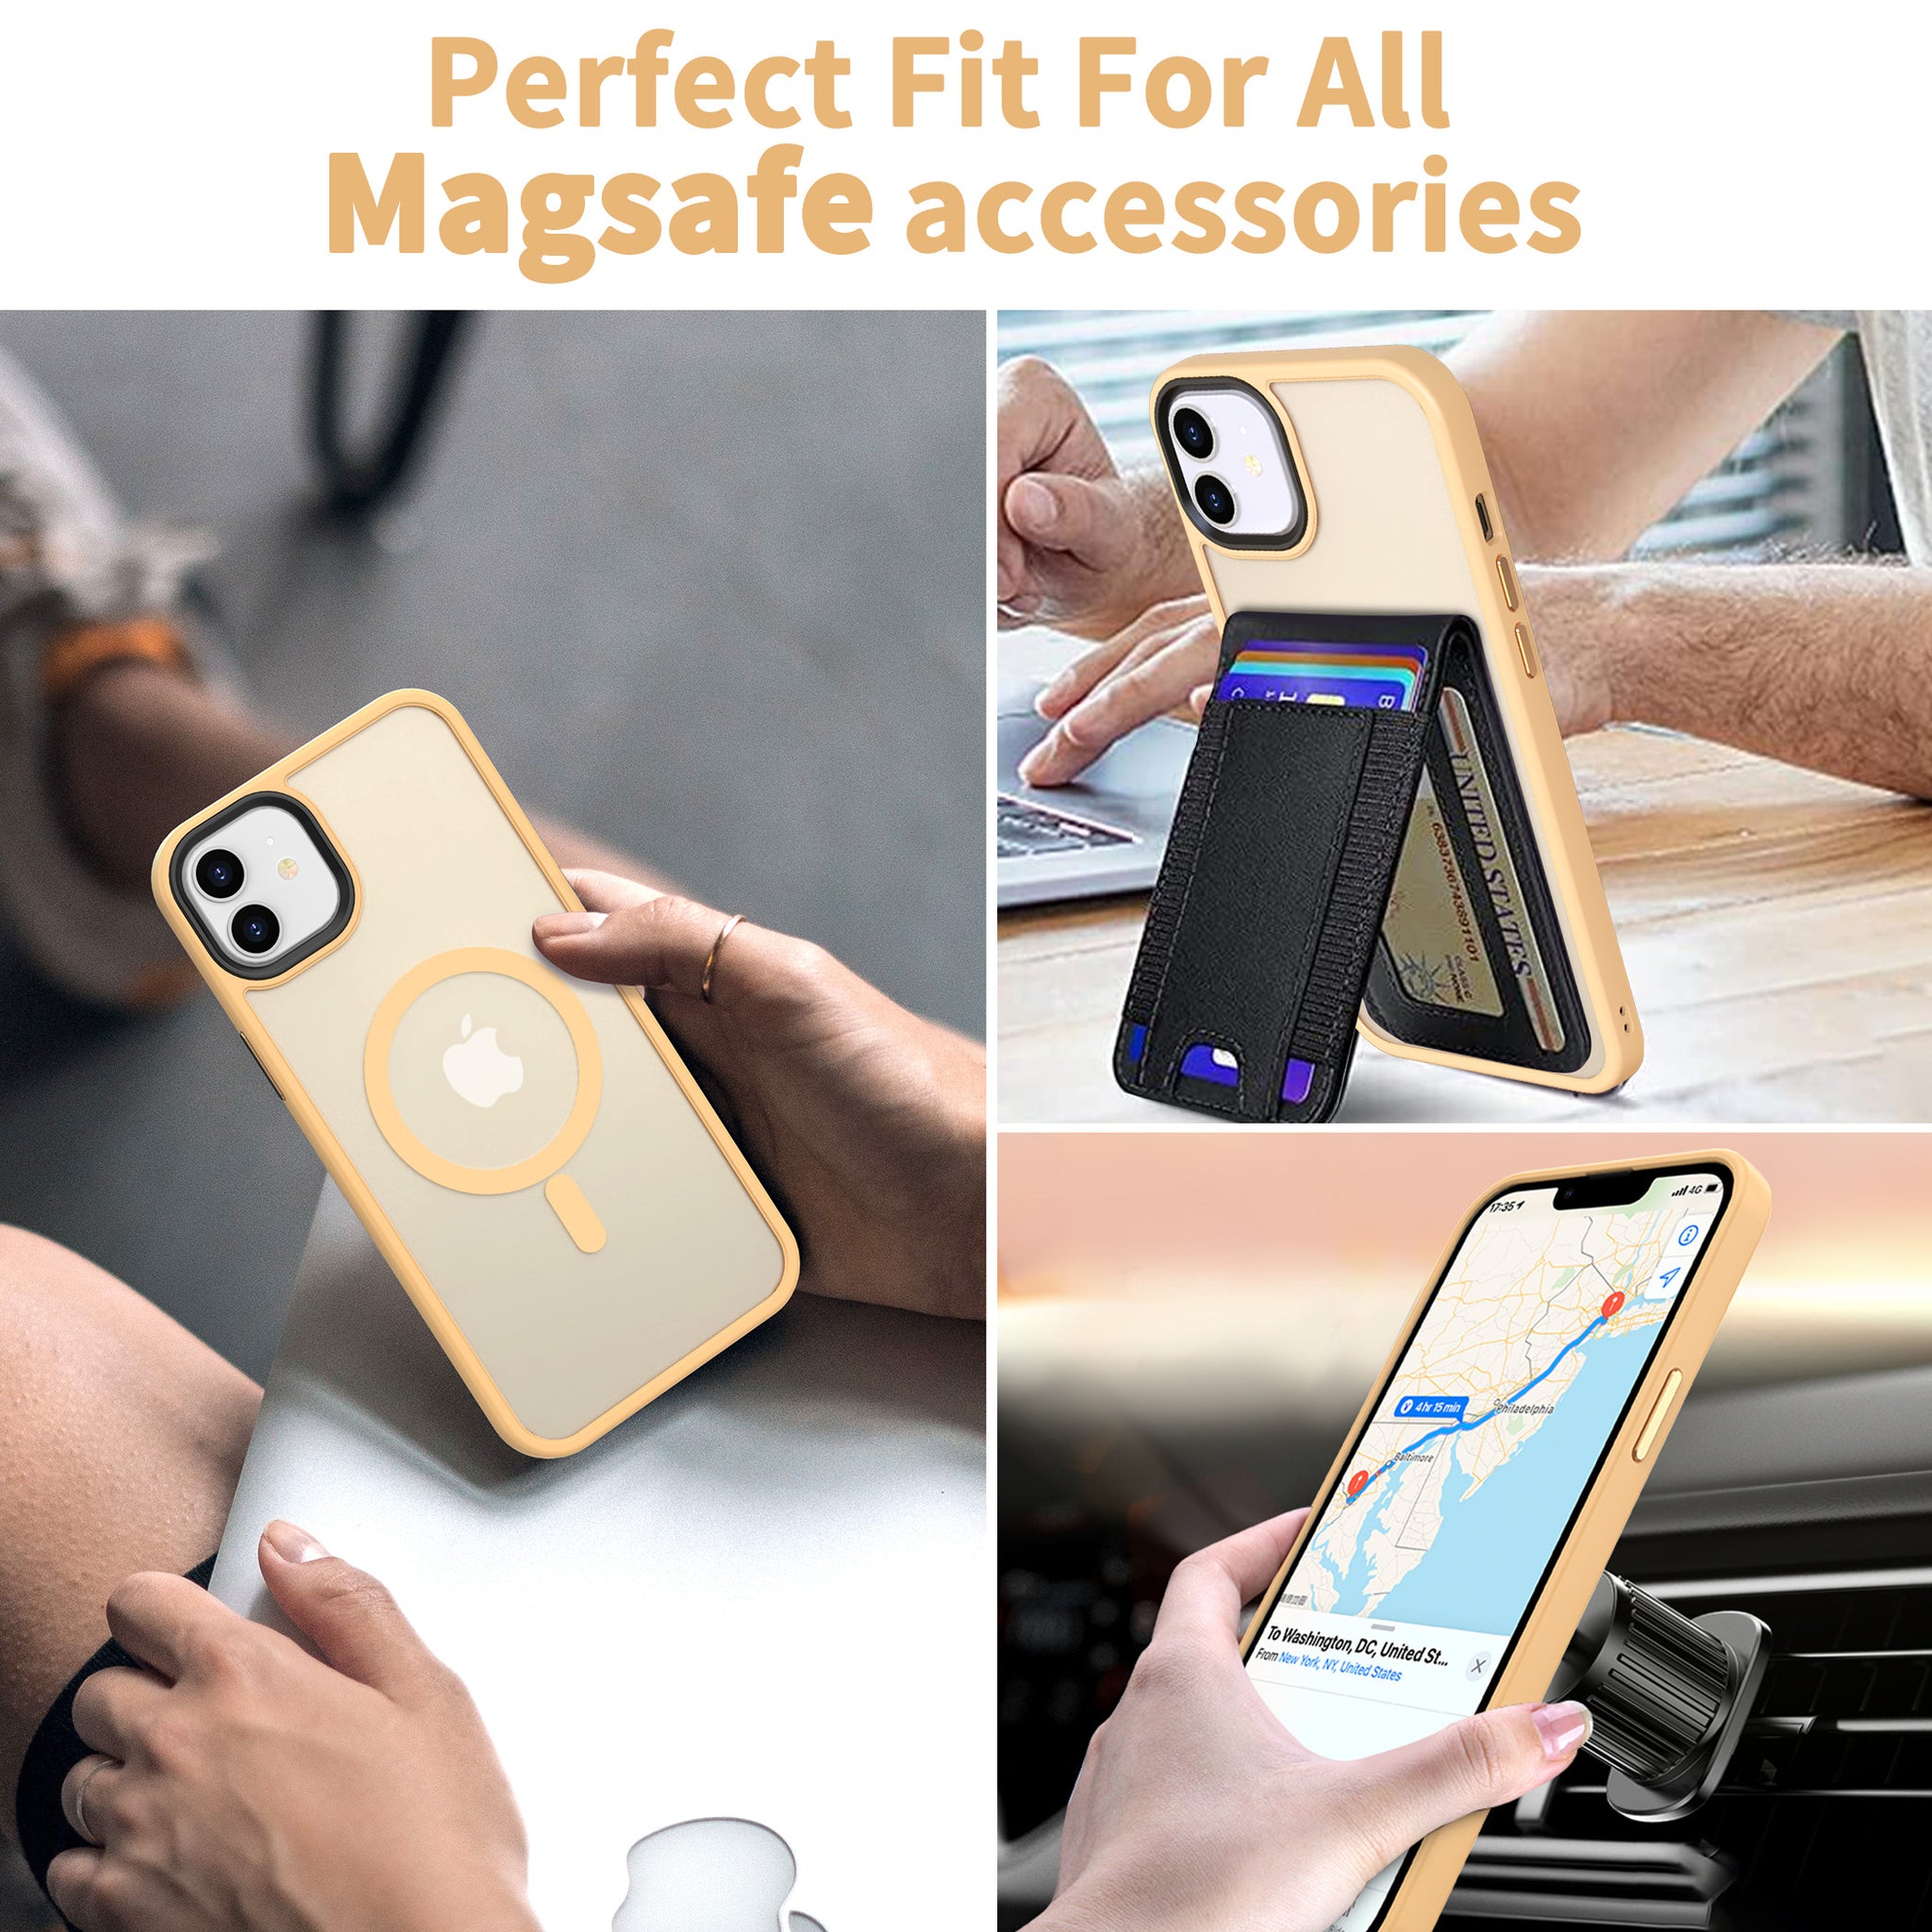 CACOE Magnetic Case for iPhone 12 & iPhone 12 Pro 2020 6.1 inch-CompaPhone Mount,Anti-Fingerprint TPU Thin Phone Cases Cover Protective Shockproof (Yellow)